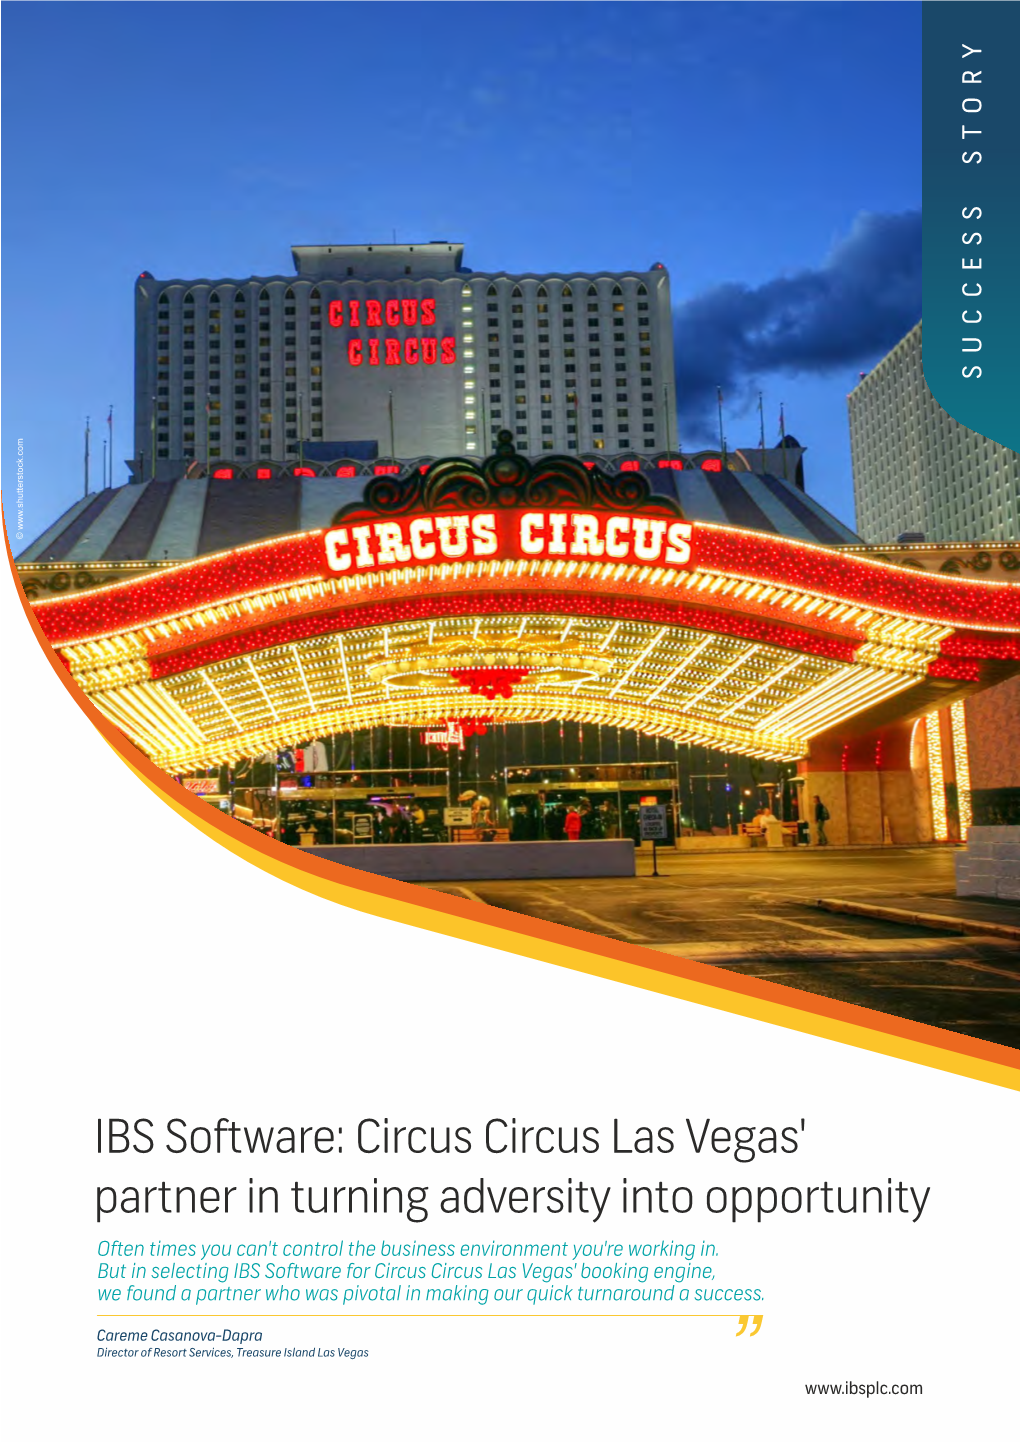 Circus Circus Las Vegas' Partner in Turning Adversity Into Opportunity Often Times You Can't Control the Business Environment You're Working In